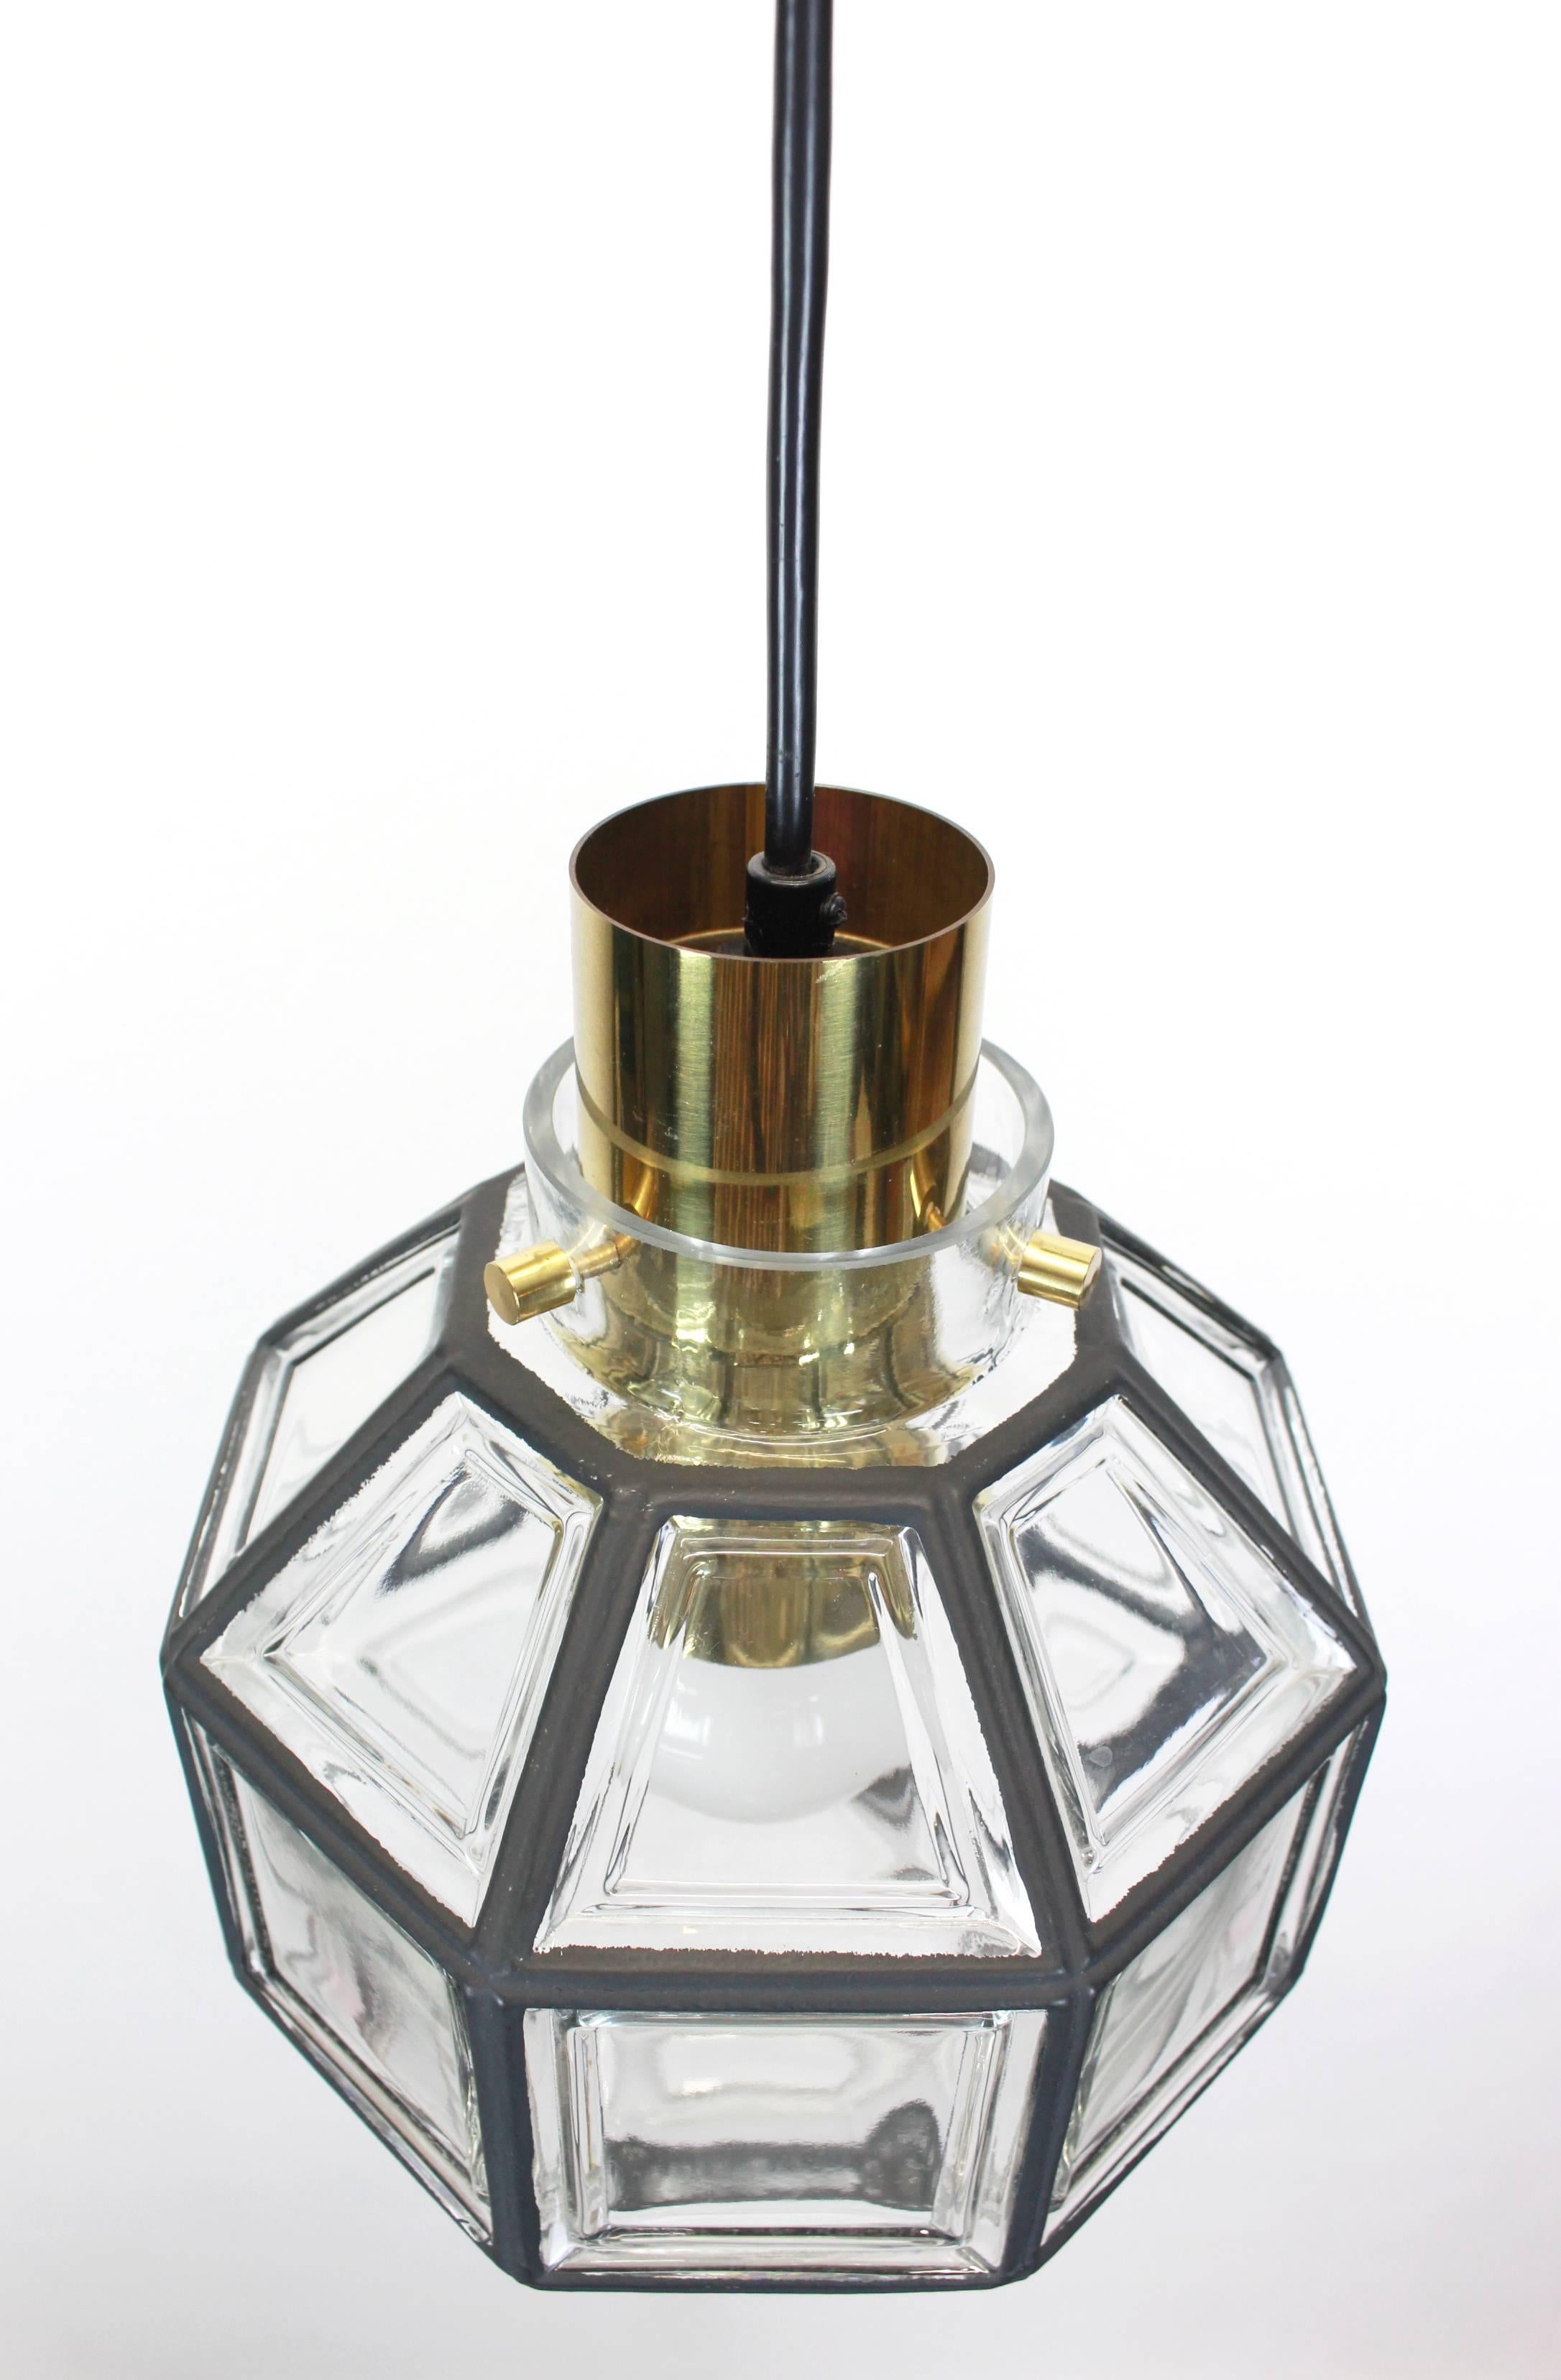 Minimalist iron and clear glass pendant light manufactured by Limburg Glashu¨tte, Germany, circa 1960-1969. Octagonal shaped lantern and multi-faceted clear glass.

High quality and in very good condition. Cleaned, well-wired and ready to use. 

The